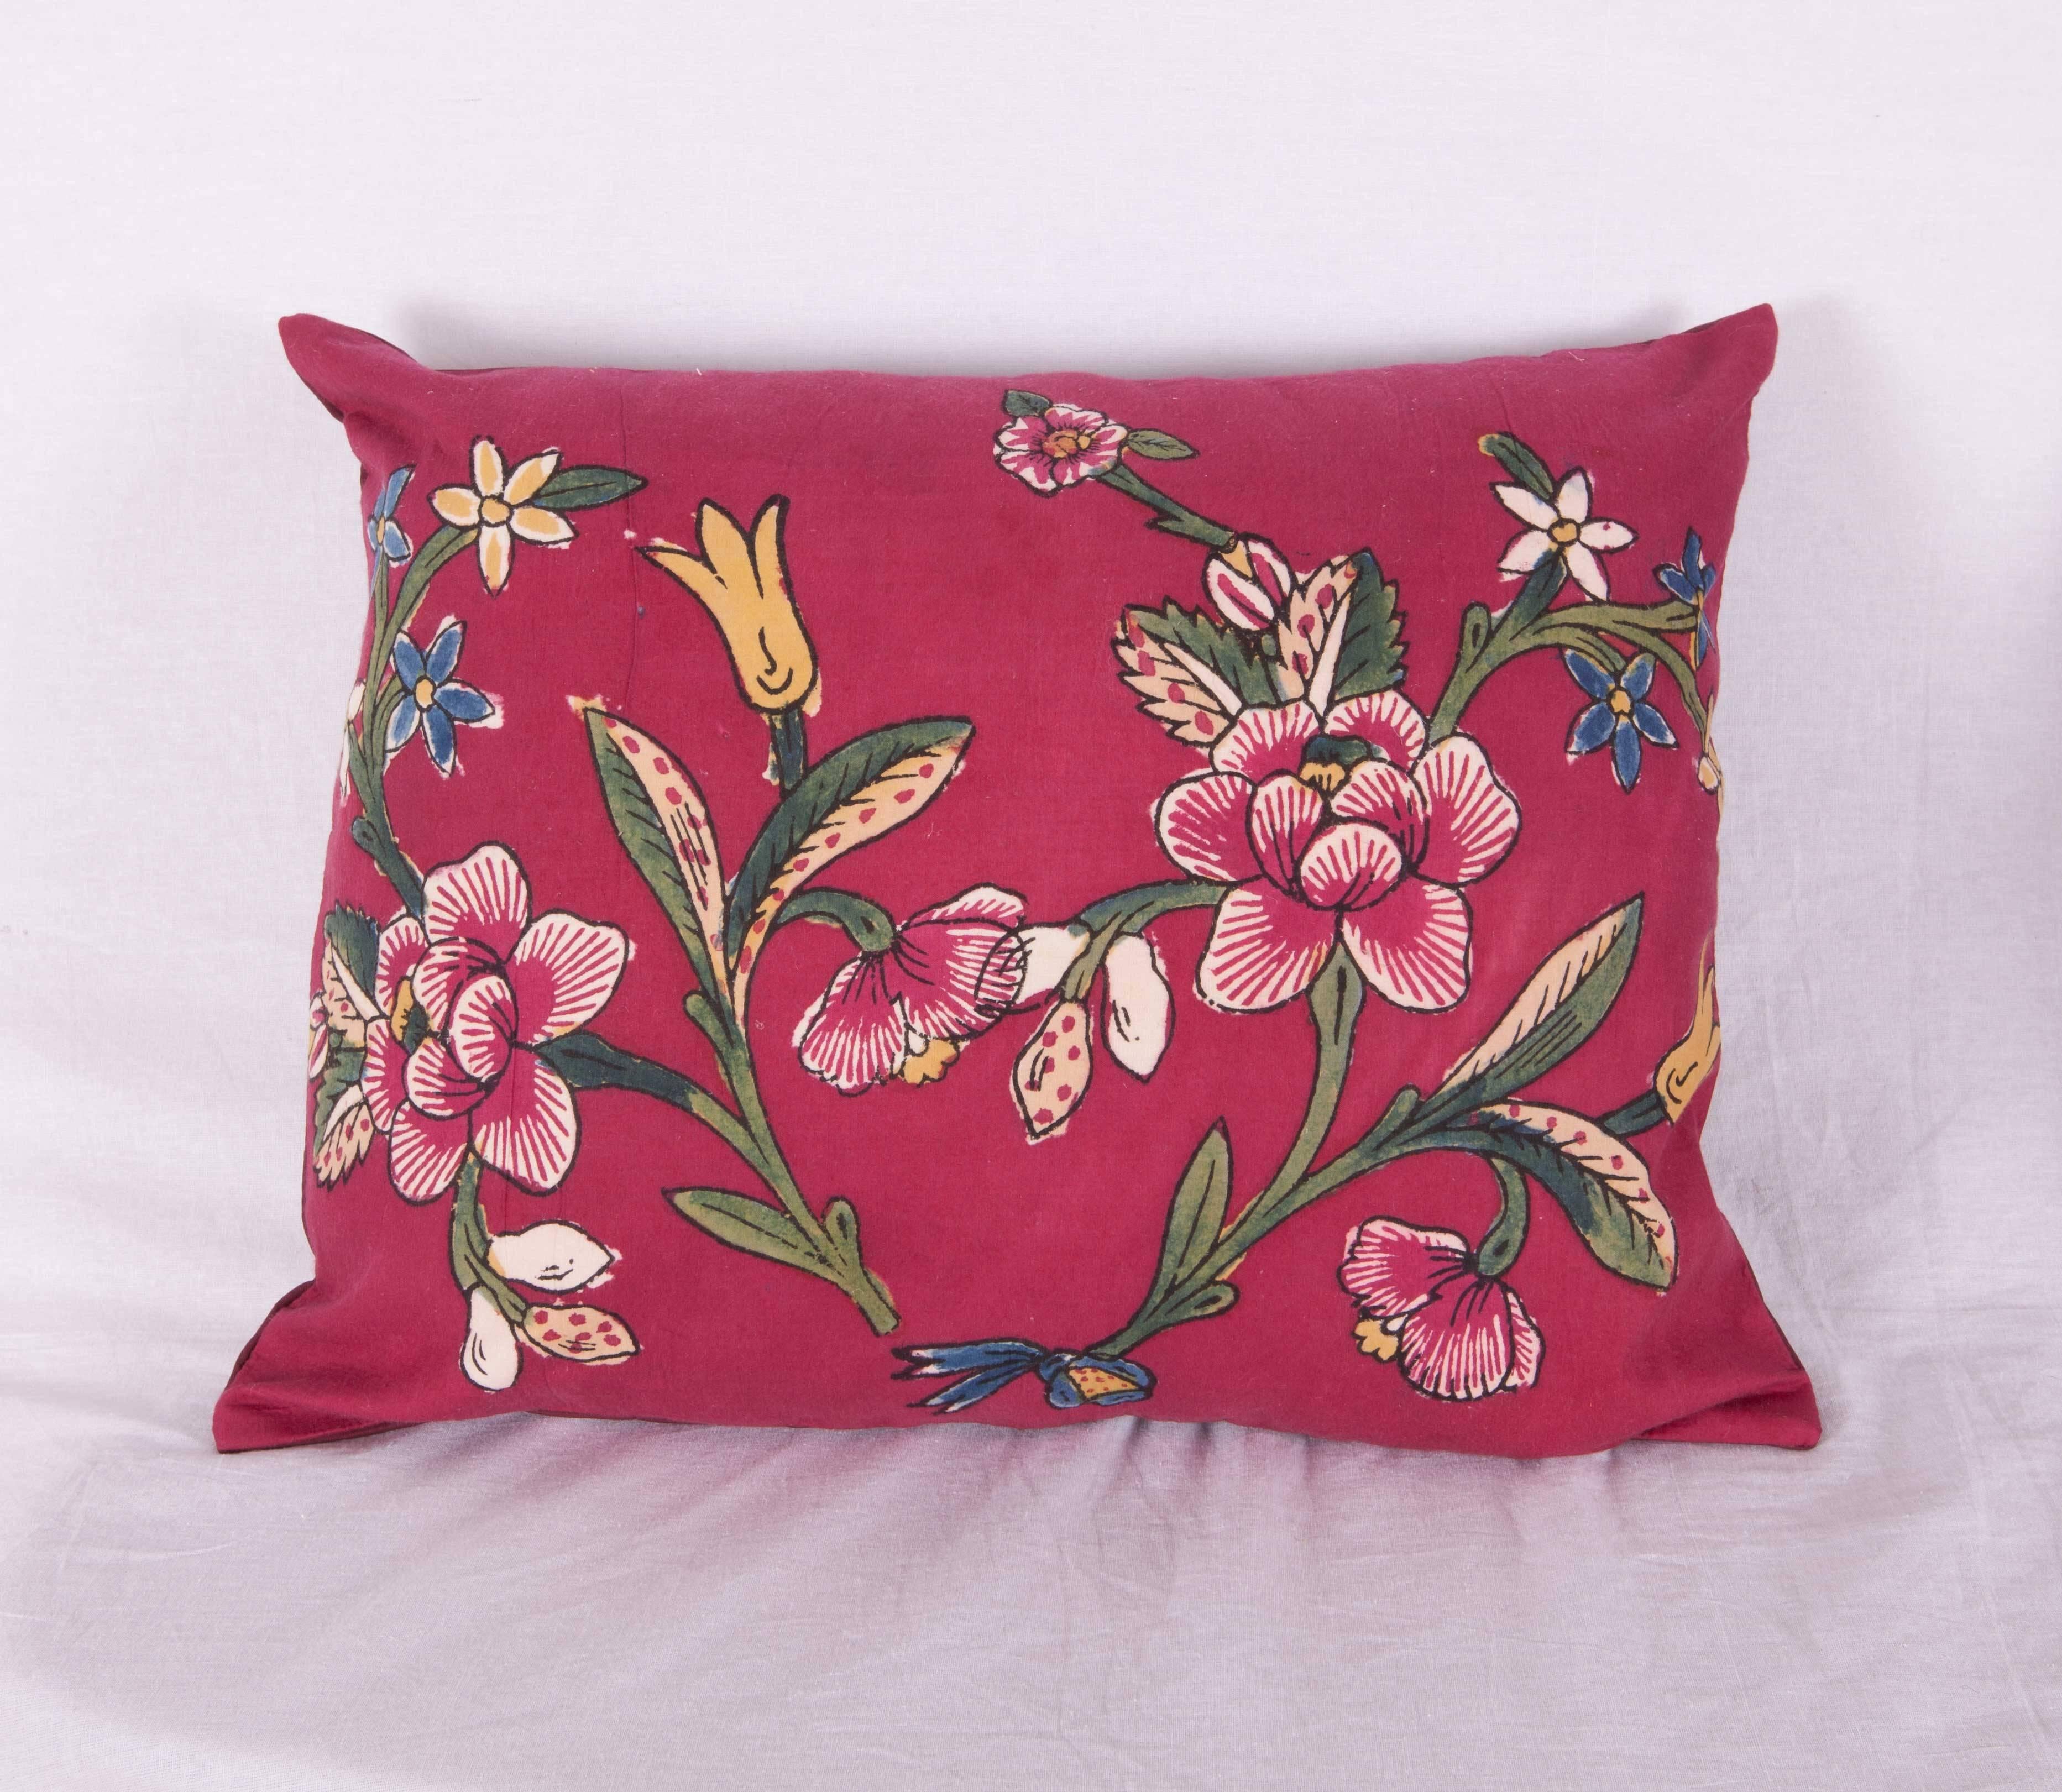 Hand-Crafted Pillow Cases Made from a Turkish Hand Block Printed Mid-20th Century Textile